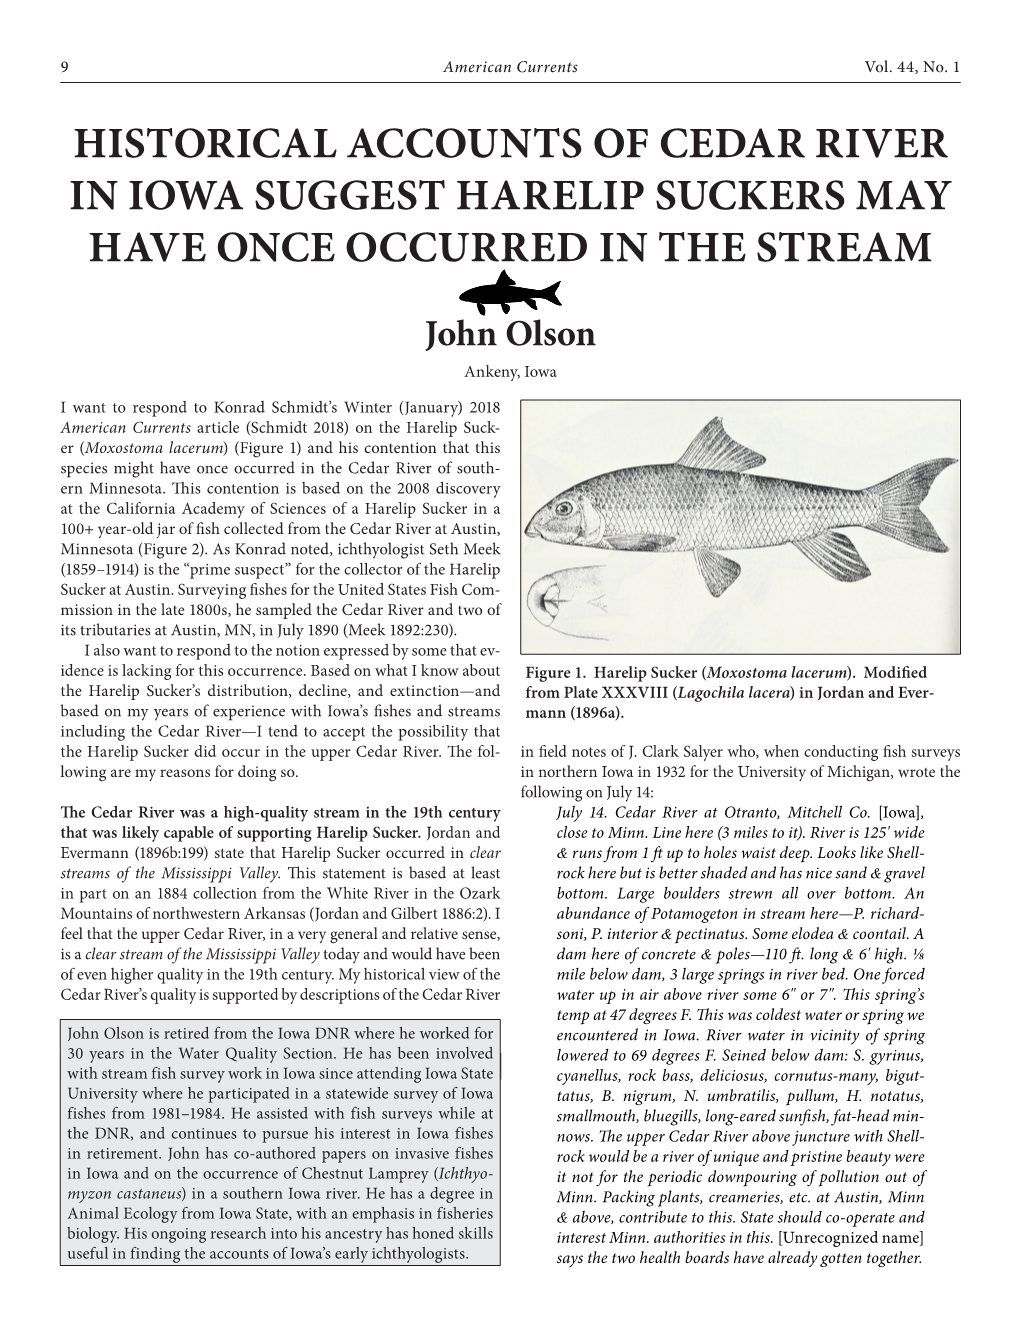 Historical Accounts of Cedar River in Iowa Suggest Harelip Suckers May Have Once Occurred in the Stream